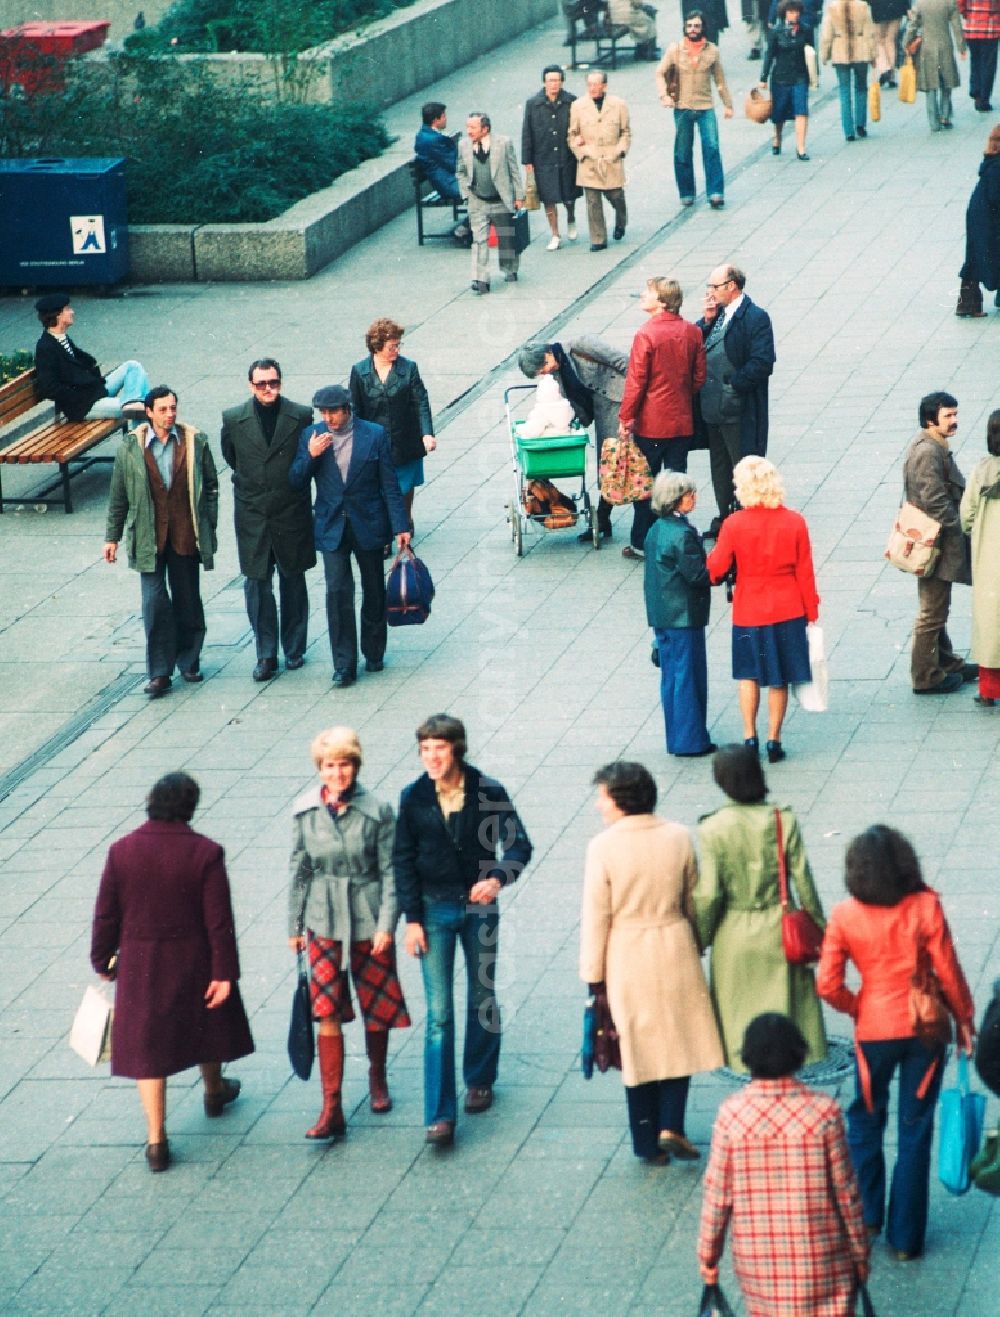 GDR picture archive: Berlin - People on the Rathauspassage, Alexpassage at Alexanderplatz in Berlin